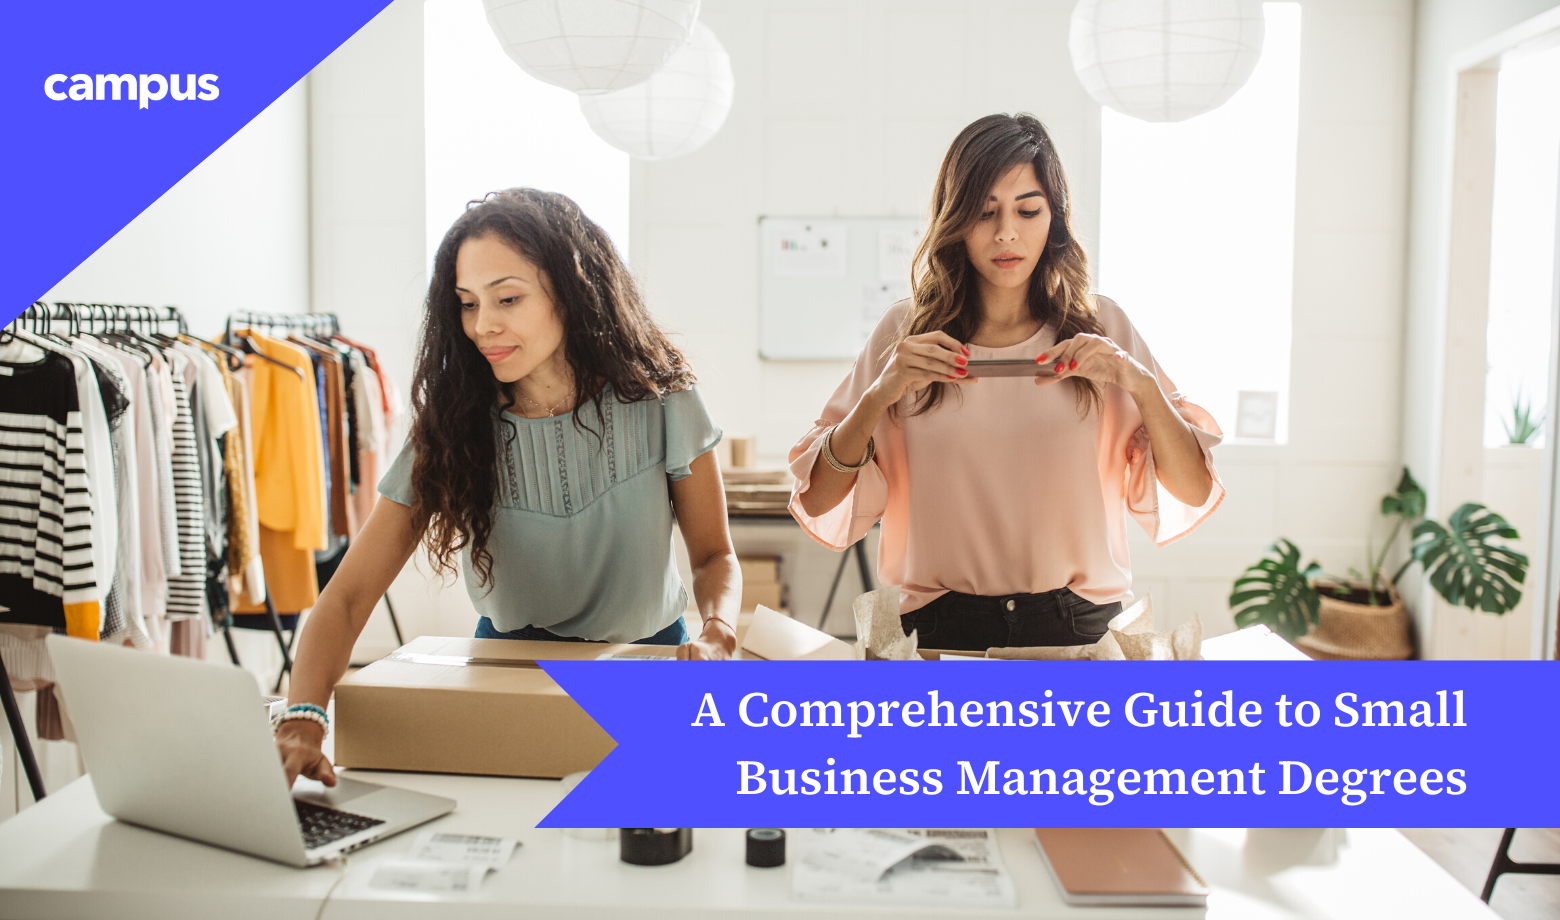 Small Business Management Degree Guide